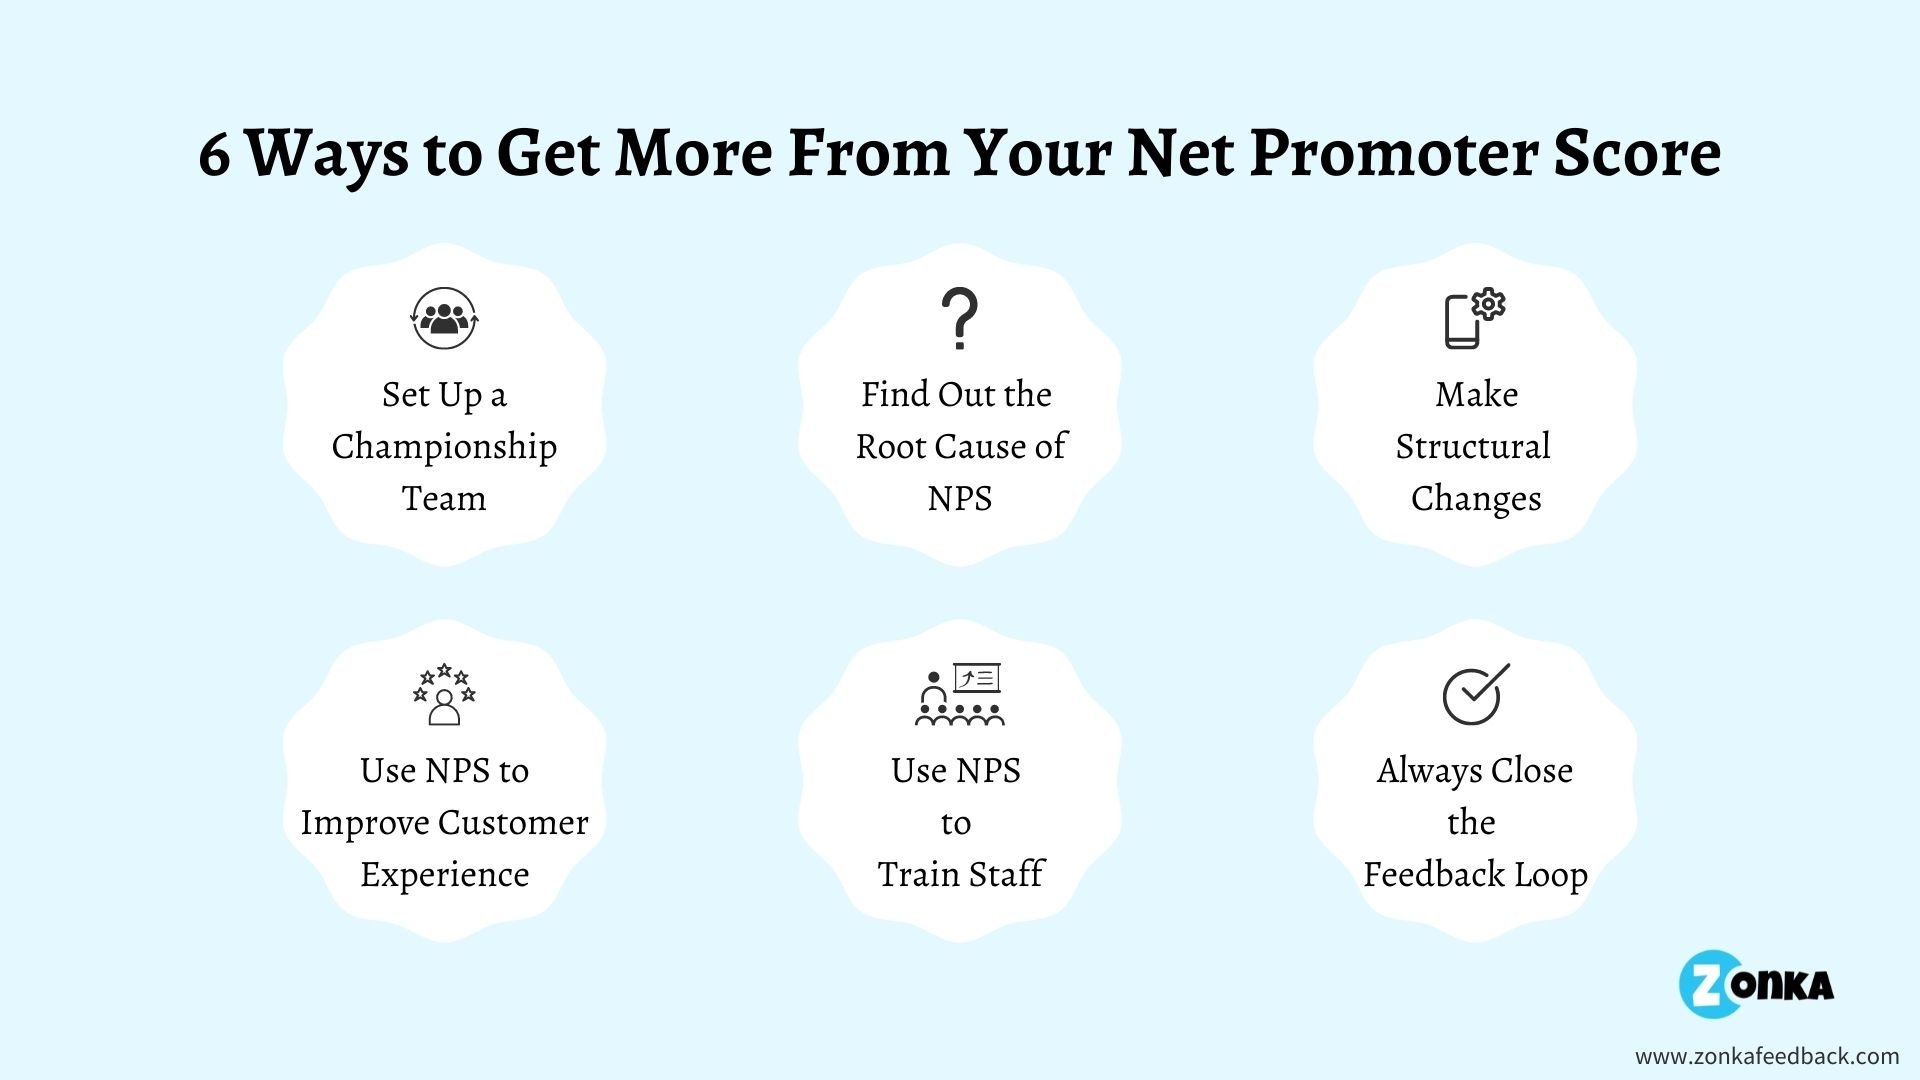 6 Ways to Get More From Your Net Promoter Score (2)